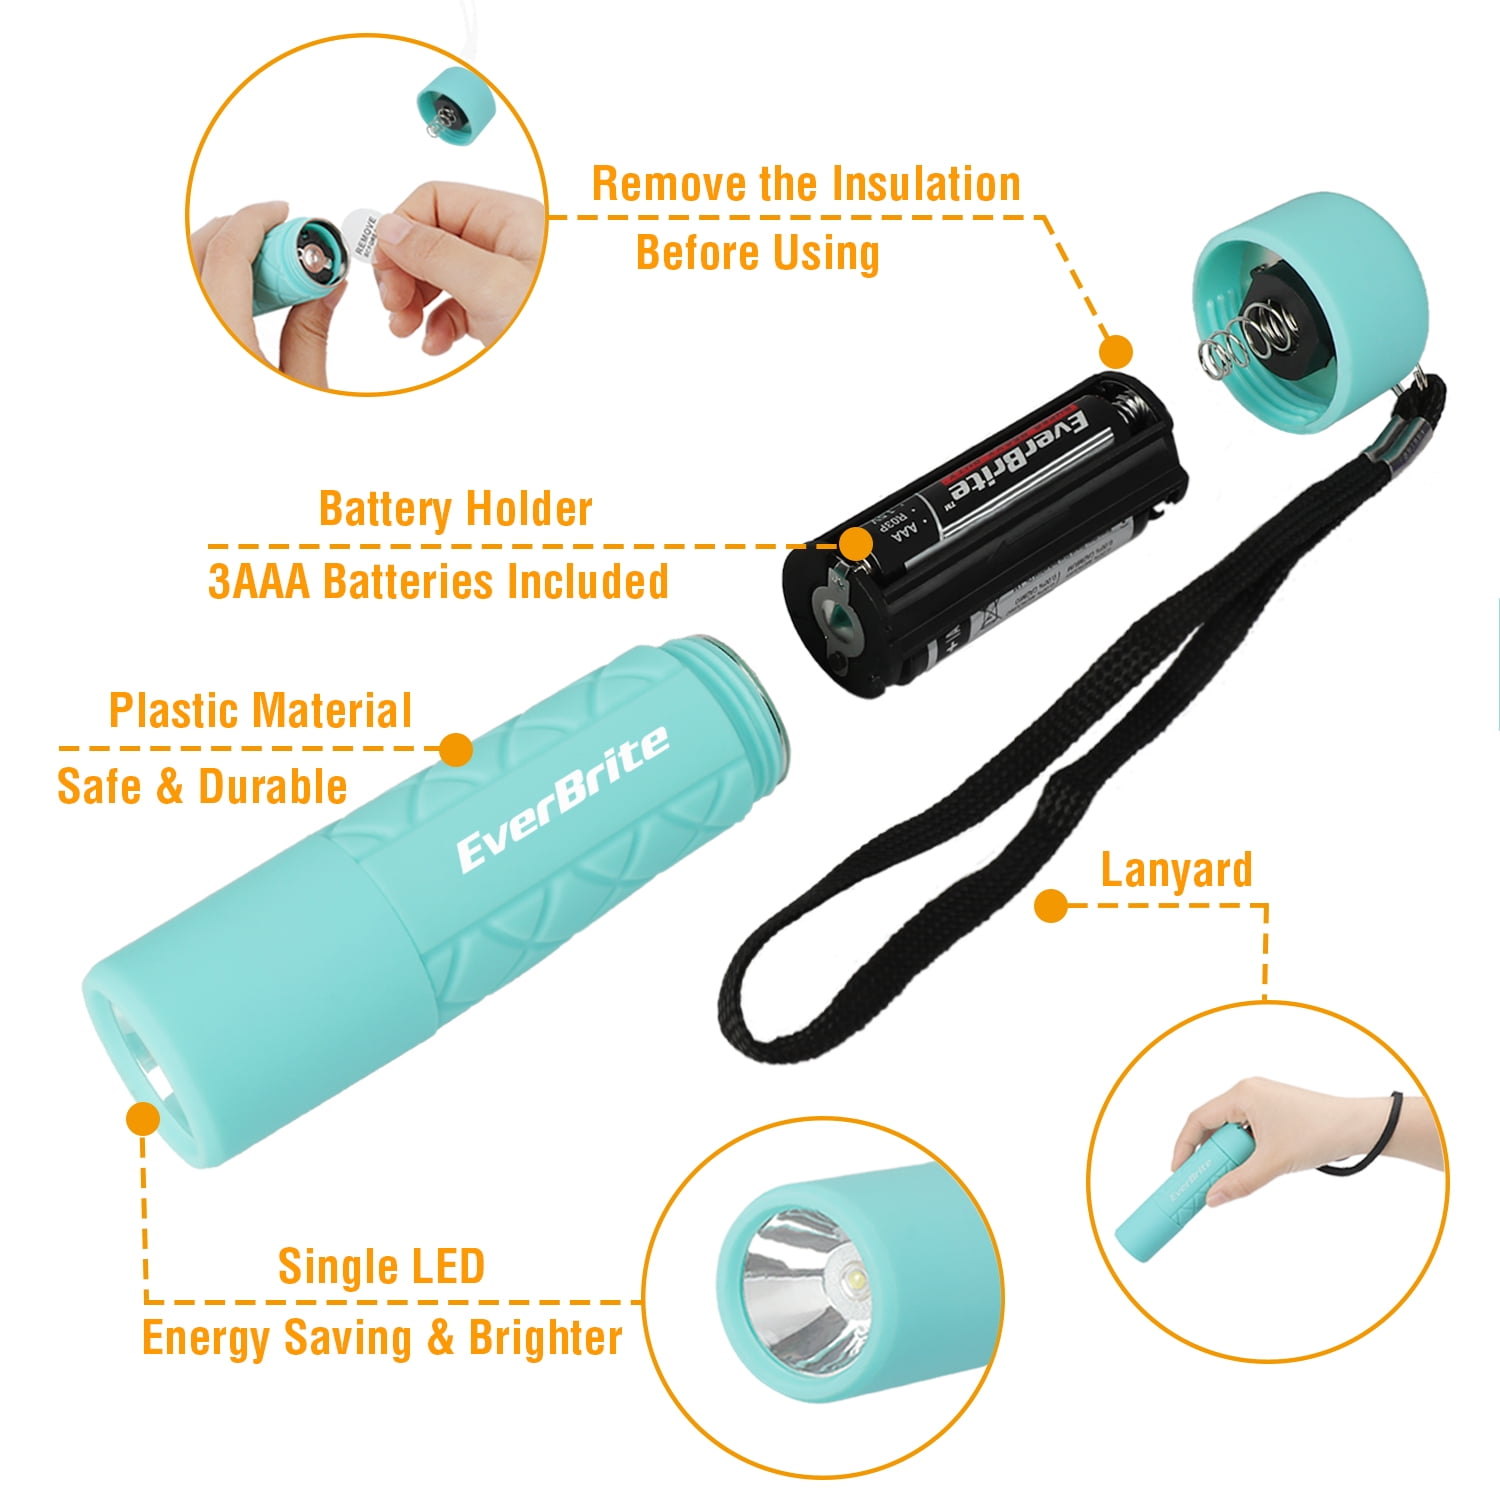 D Cell Battery Powered LED Torch Flashlight for Emergency and Outdoor  Activities - Convenient Single Lighting Mode, Ideal for Hurricane Supplies  and P